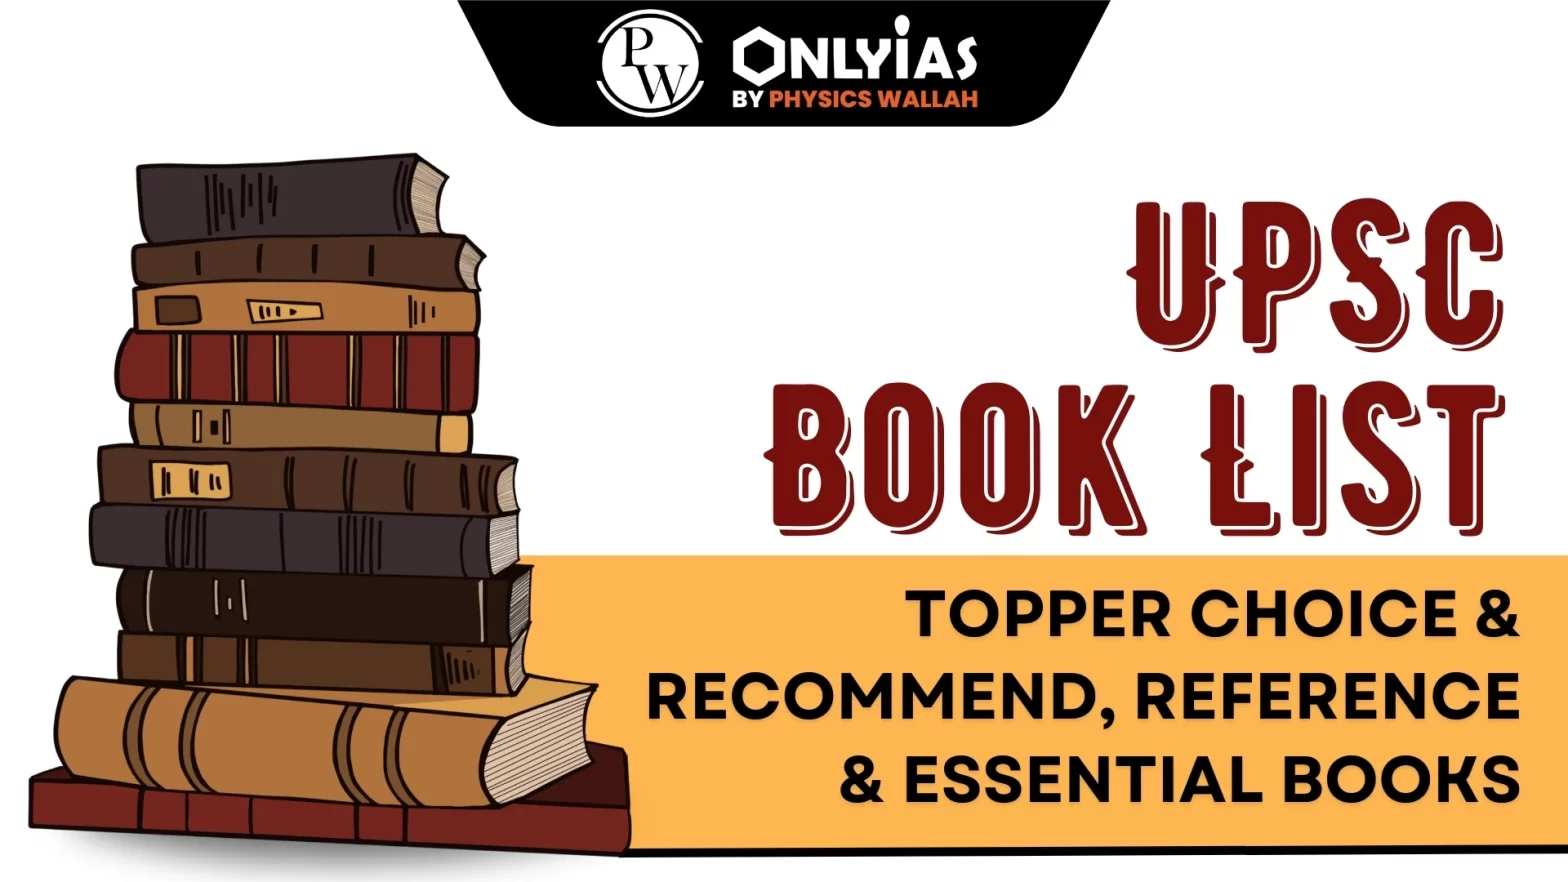 UPSC Book List: Topper Choice & Recommend, Reference & Essential Books